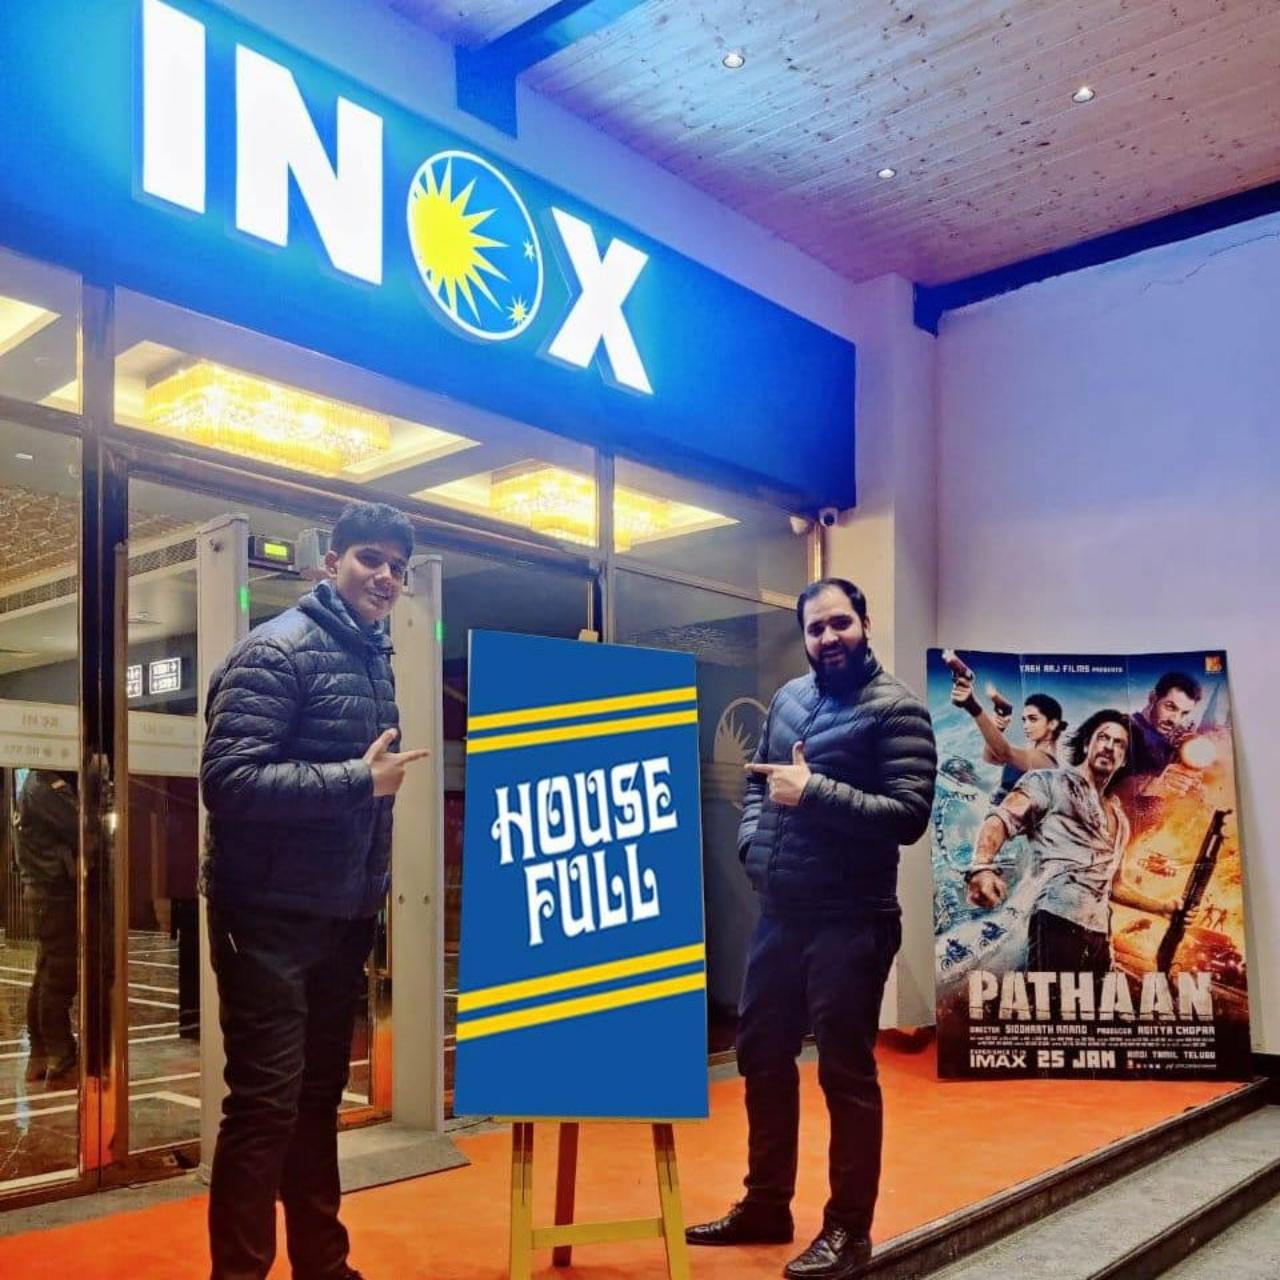 For the first time in 32 years, the Housefull board was pulled out to display at the INOX in Kashmir